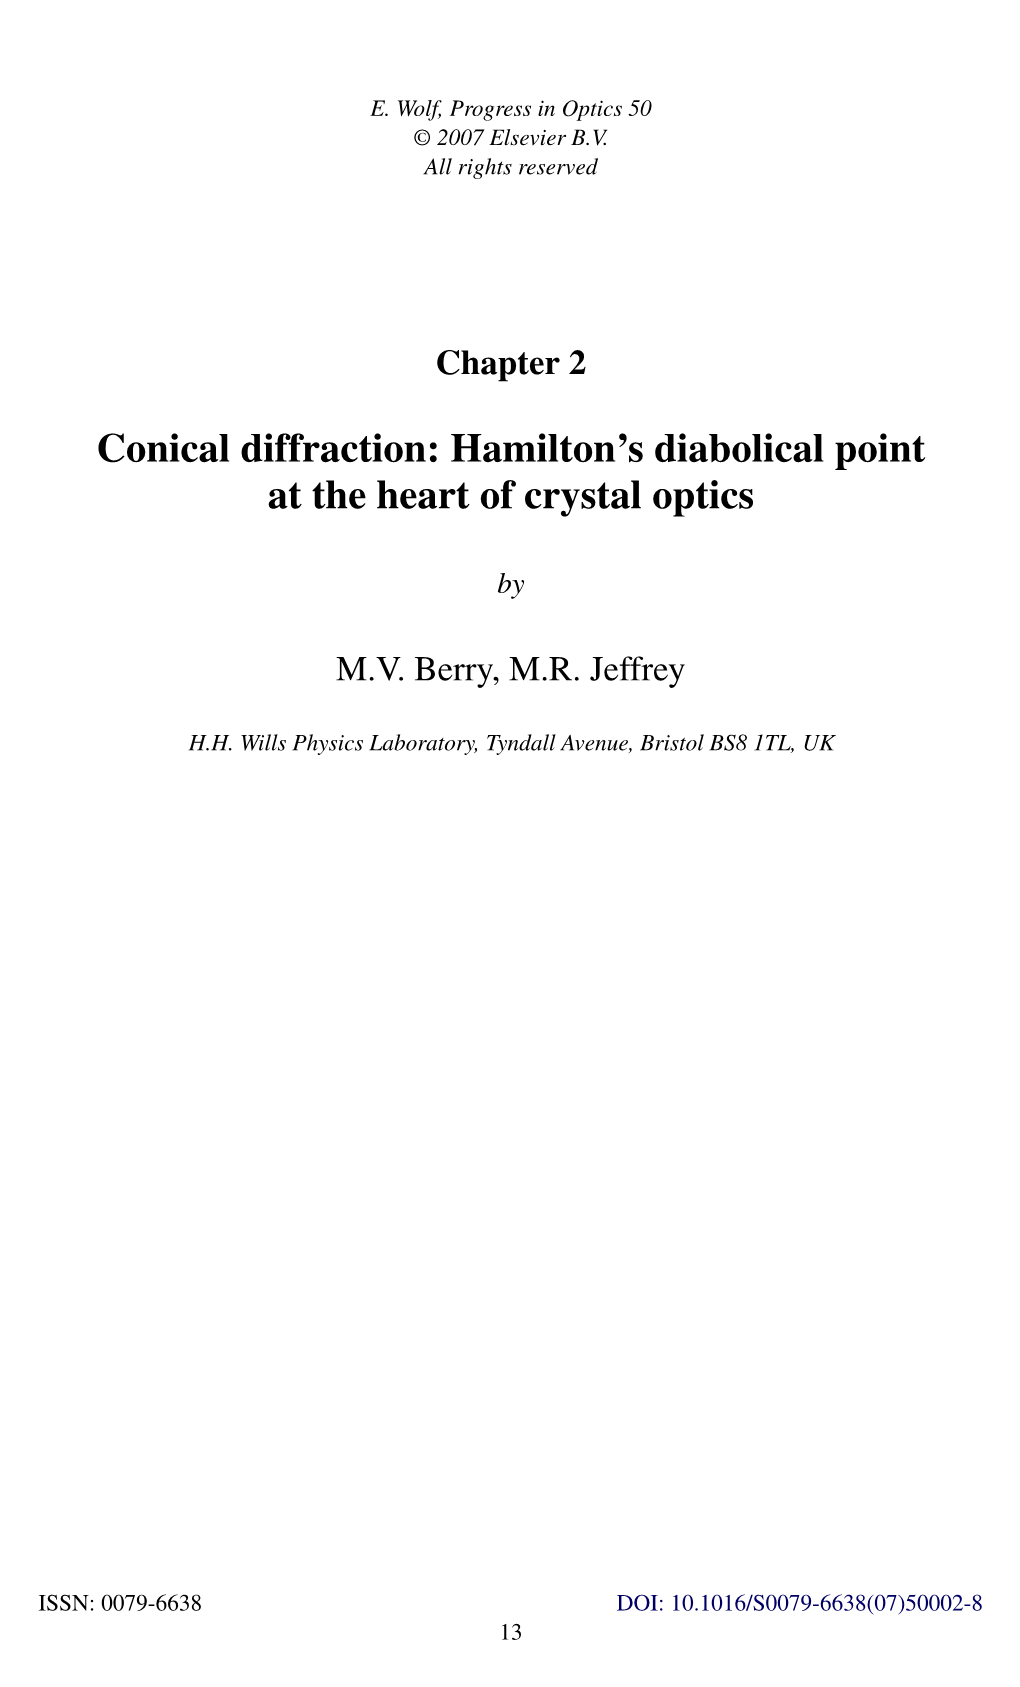 Conical Diffraction: Hamilton’S Diabolical Point 10 11 at the Heart of Crystal Optics 11 12 12 13 by 13 14 14